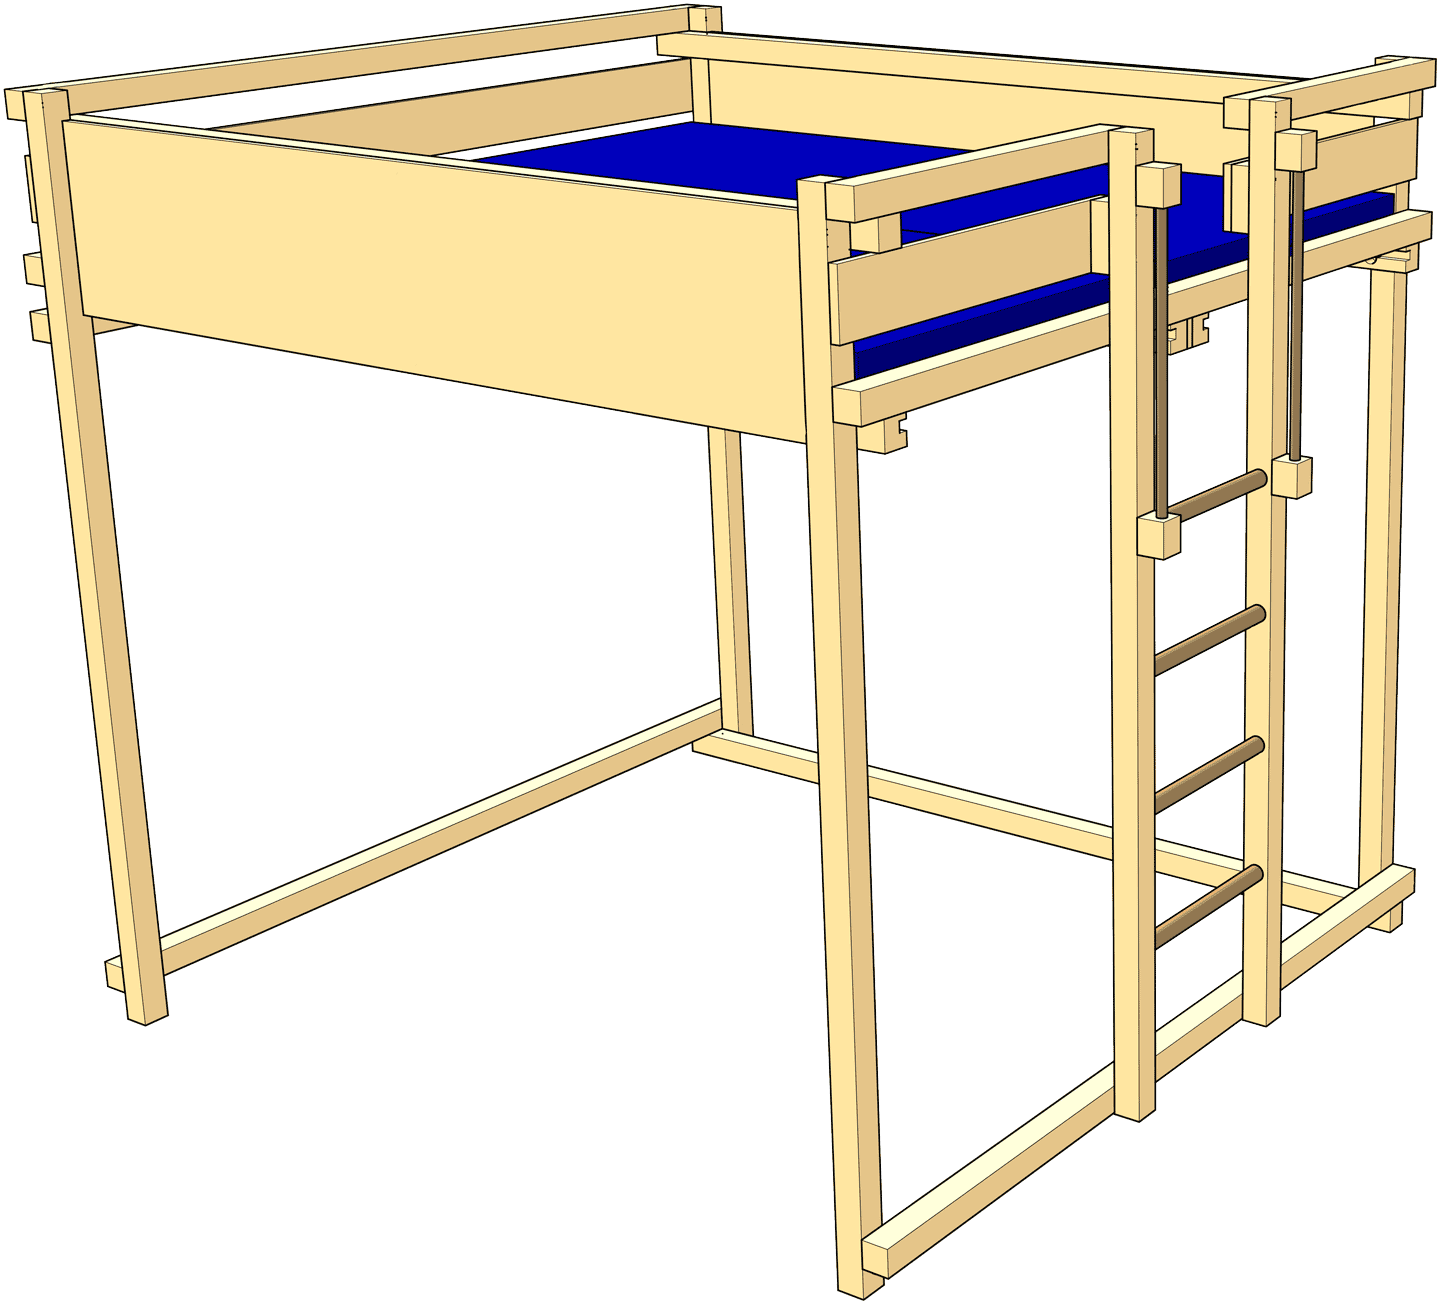 Double loft bed: loft bed with extra-wide sleeping level